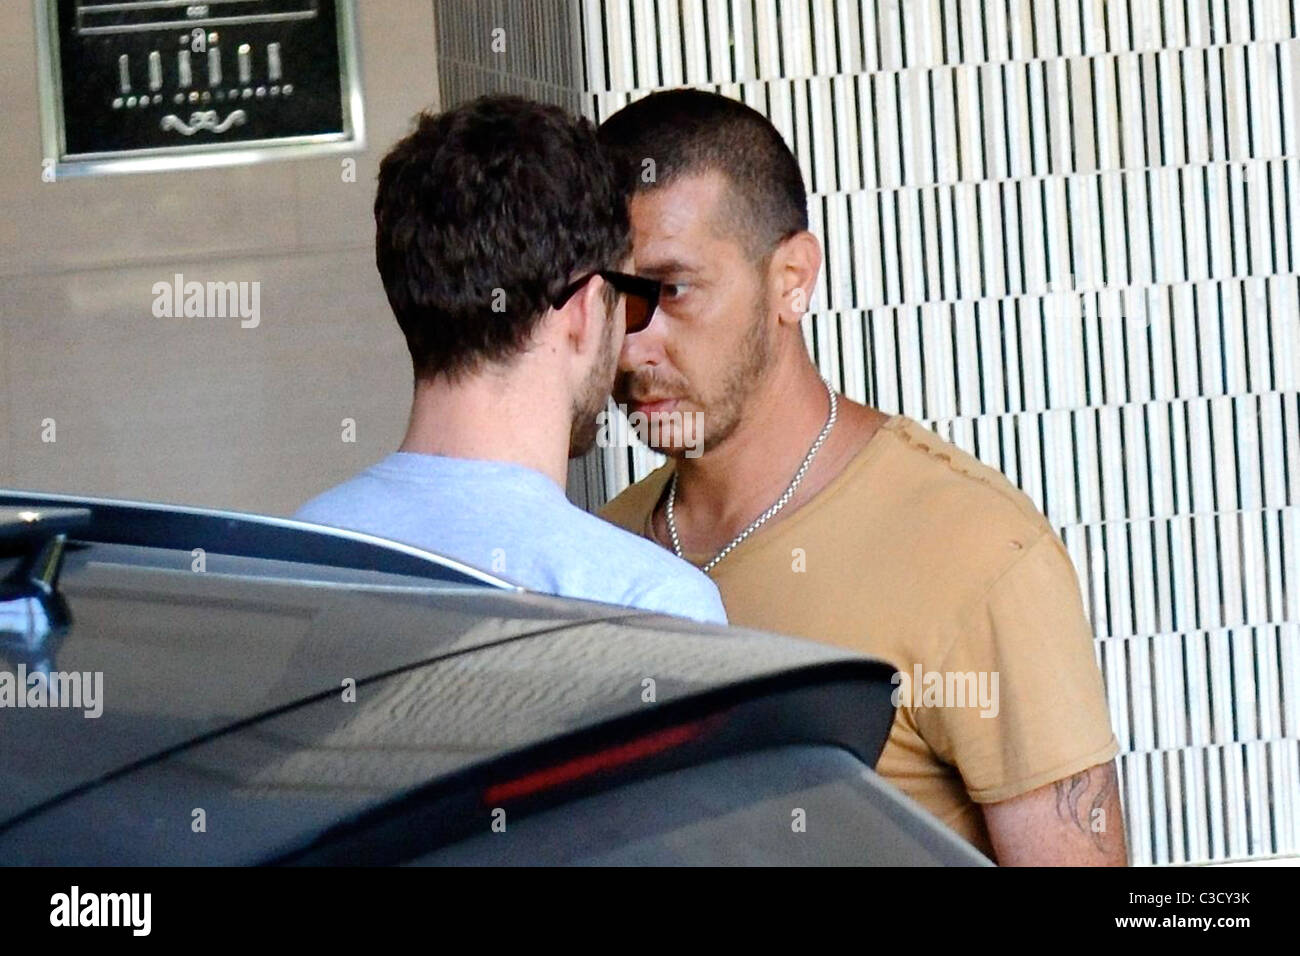 Justin Timberlake is harassed by an aggressive paparazzi as he arrives at his hotel Los Angeles, California - 14.07.09 Stock Photo